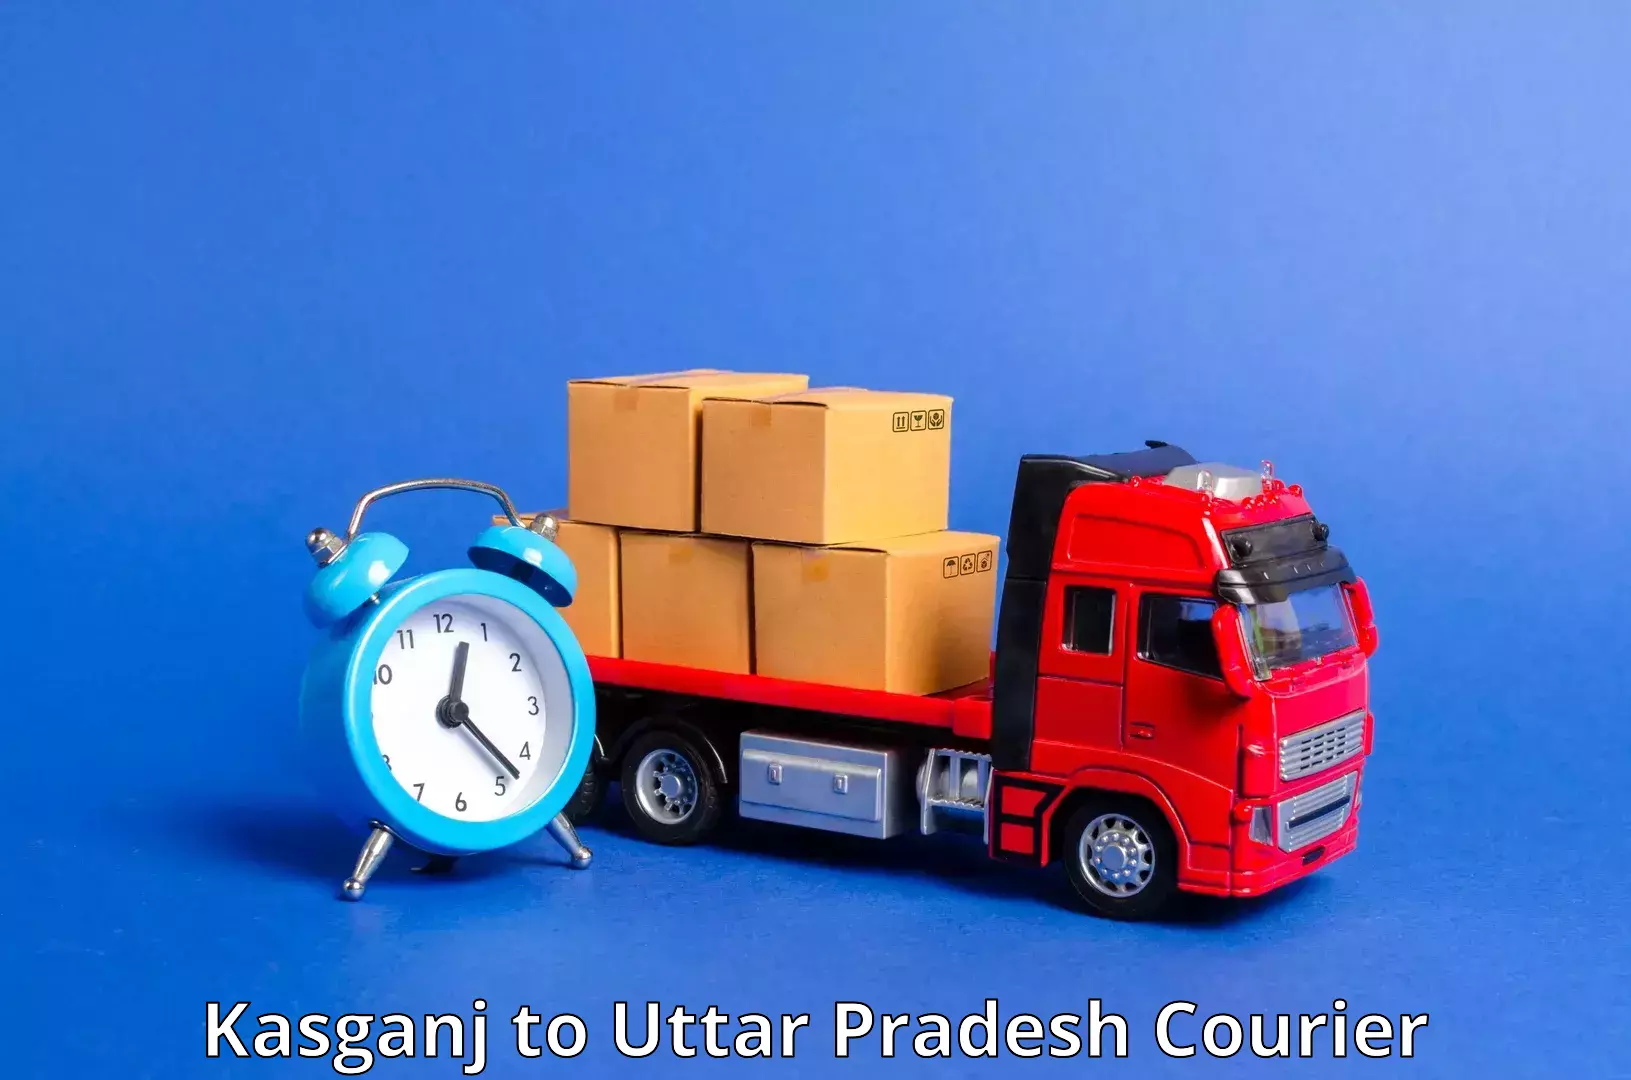 Weekend courier service Kasganj to Kanpur